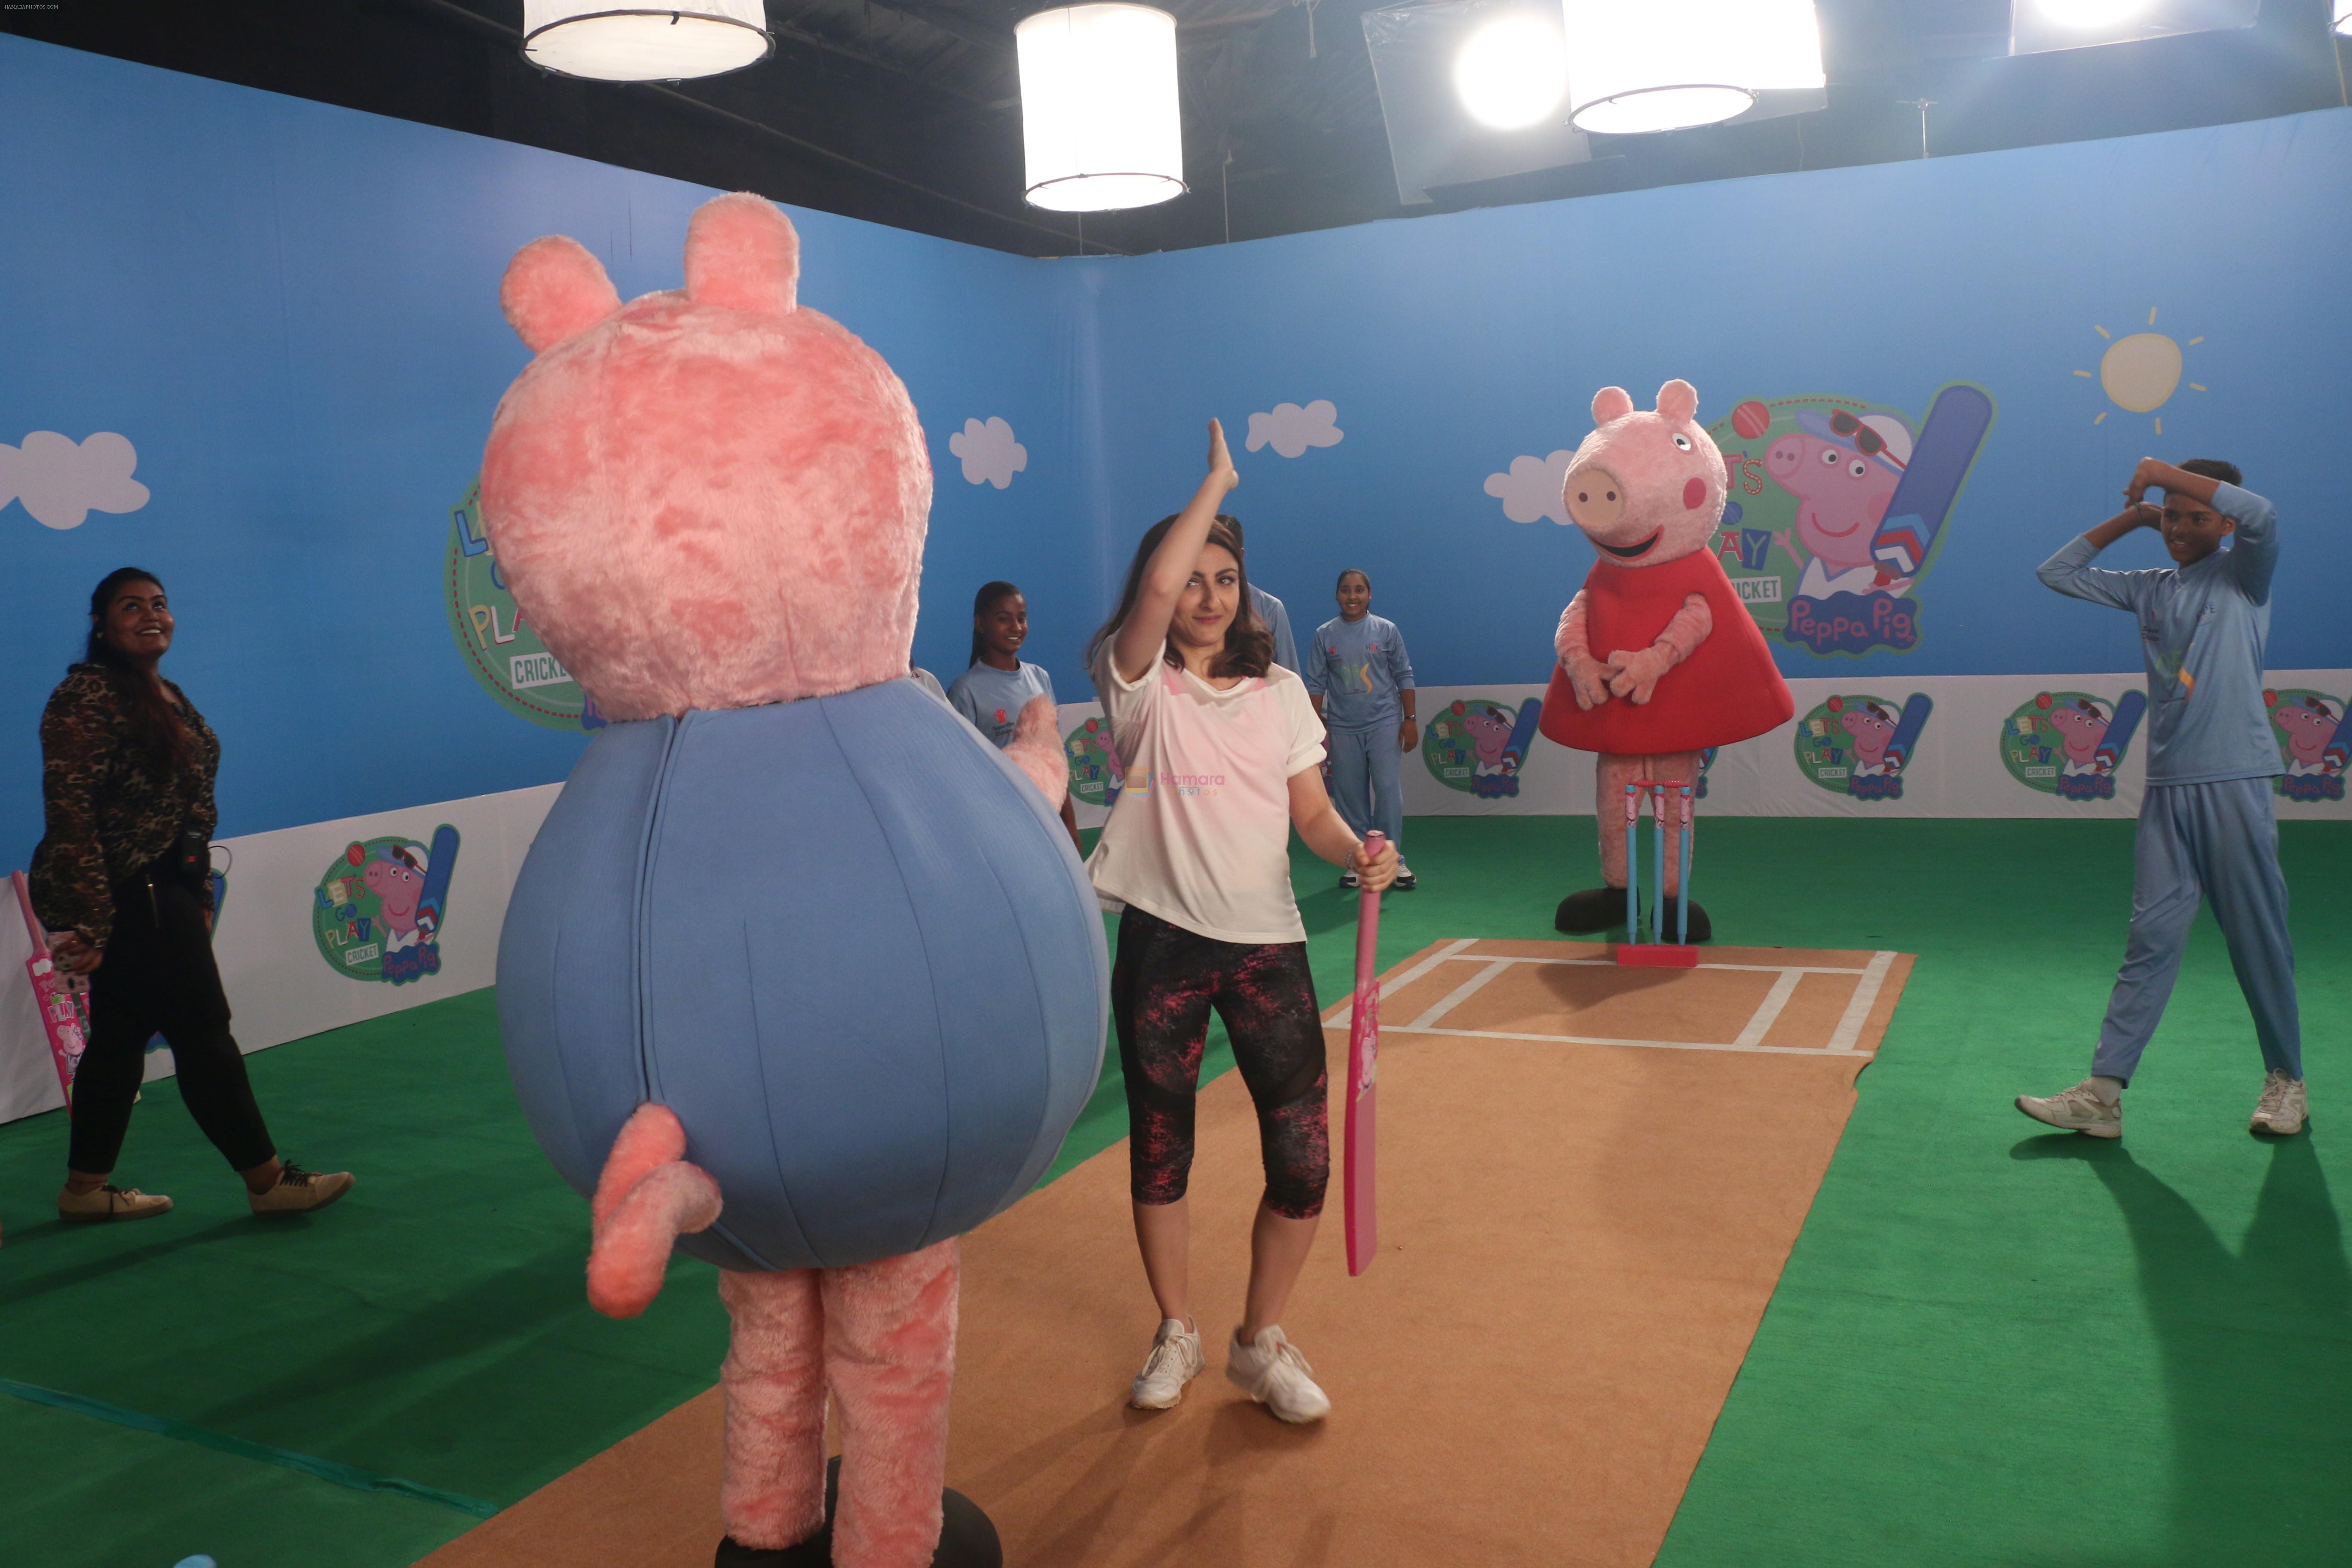 Soha Ali Khan shooting fun cricket videos with kids� favourite, Peppa Pig and George on 22nd June 2019